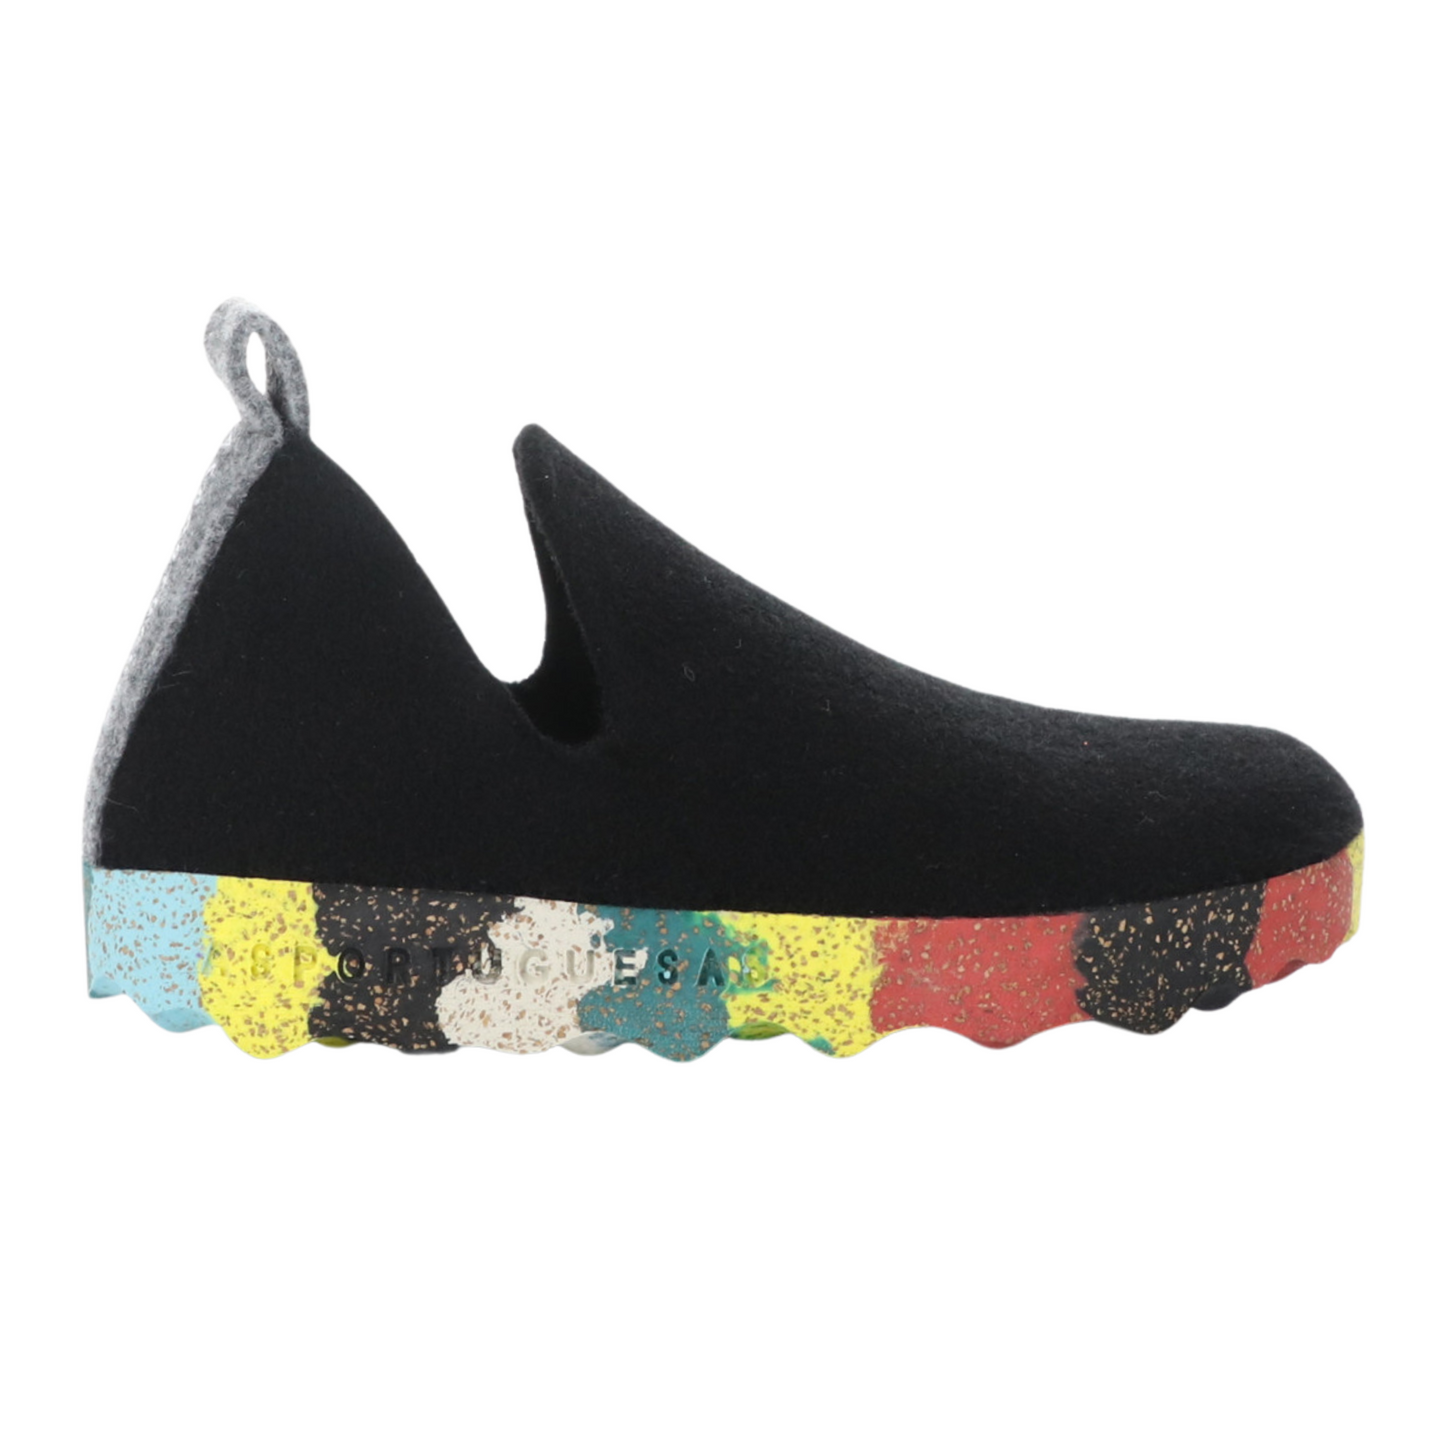 Black wool sneaker with oblong cutouts, grey heel tab, and multicoloured cork soul pictured in profile.